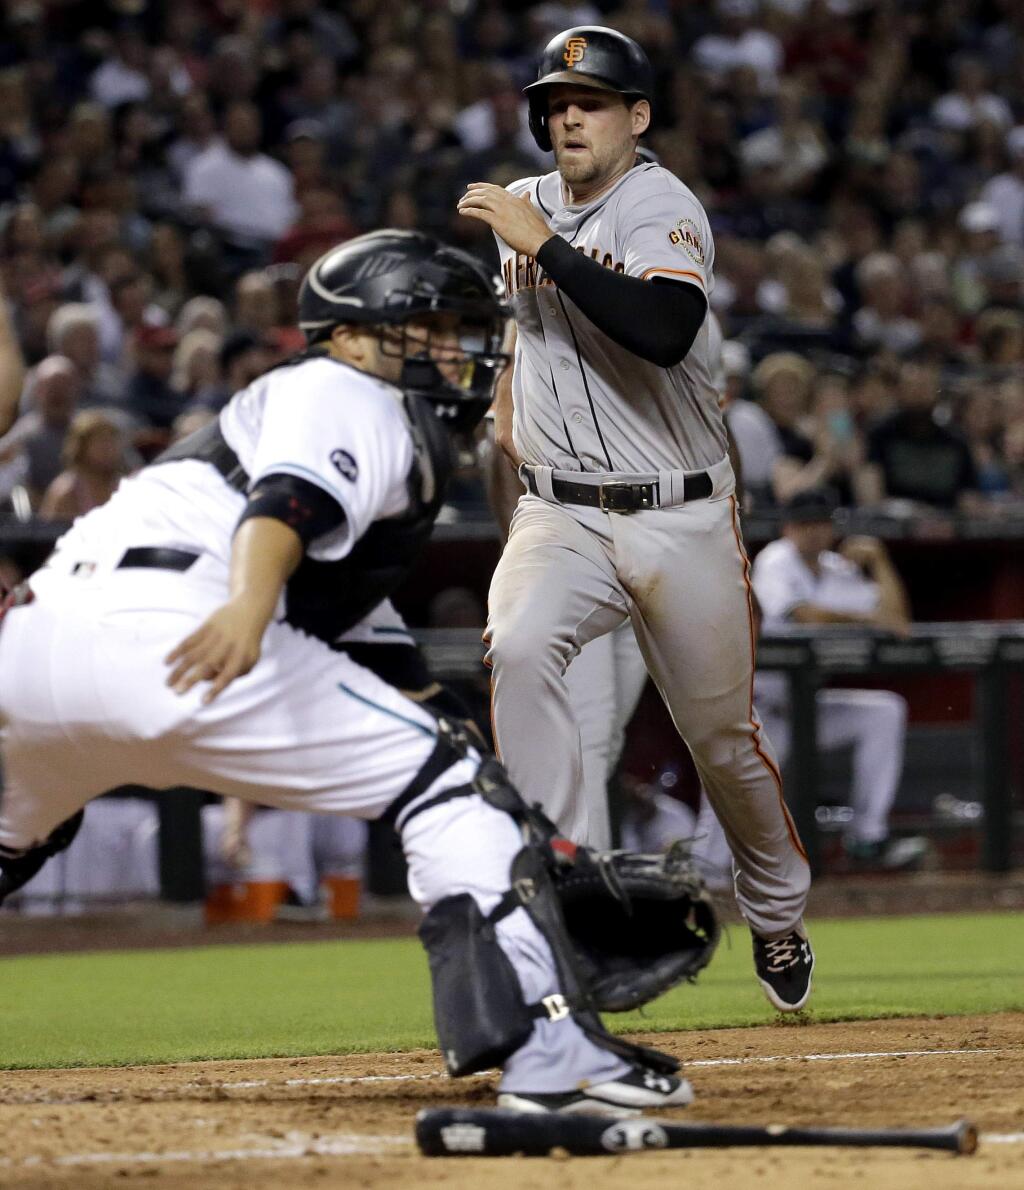 San Francisco Giants' Conor Gillaspie, right, scores on a two-RBI base hit by teammate Trevor Brown during the sixth inning of a baseball game as Arizona Diamondbacks' Welington Castillo waits for the throw, Friday, July 1, 2016, in Phoenix. (AP Photo/Matt York)